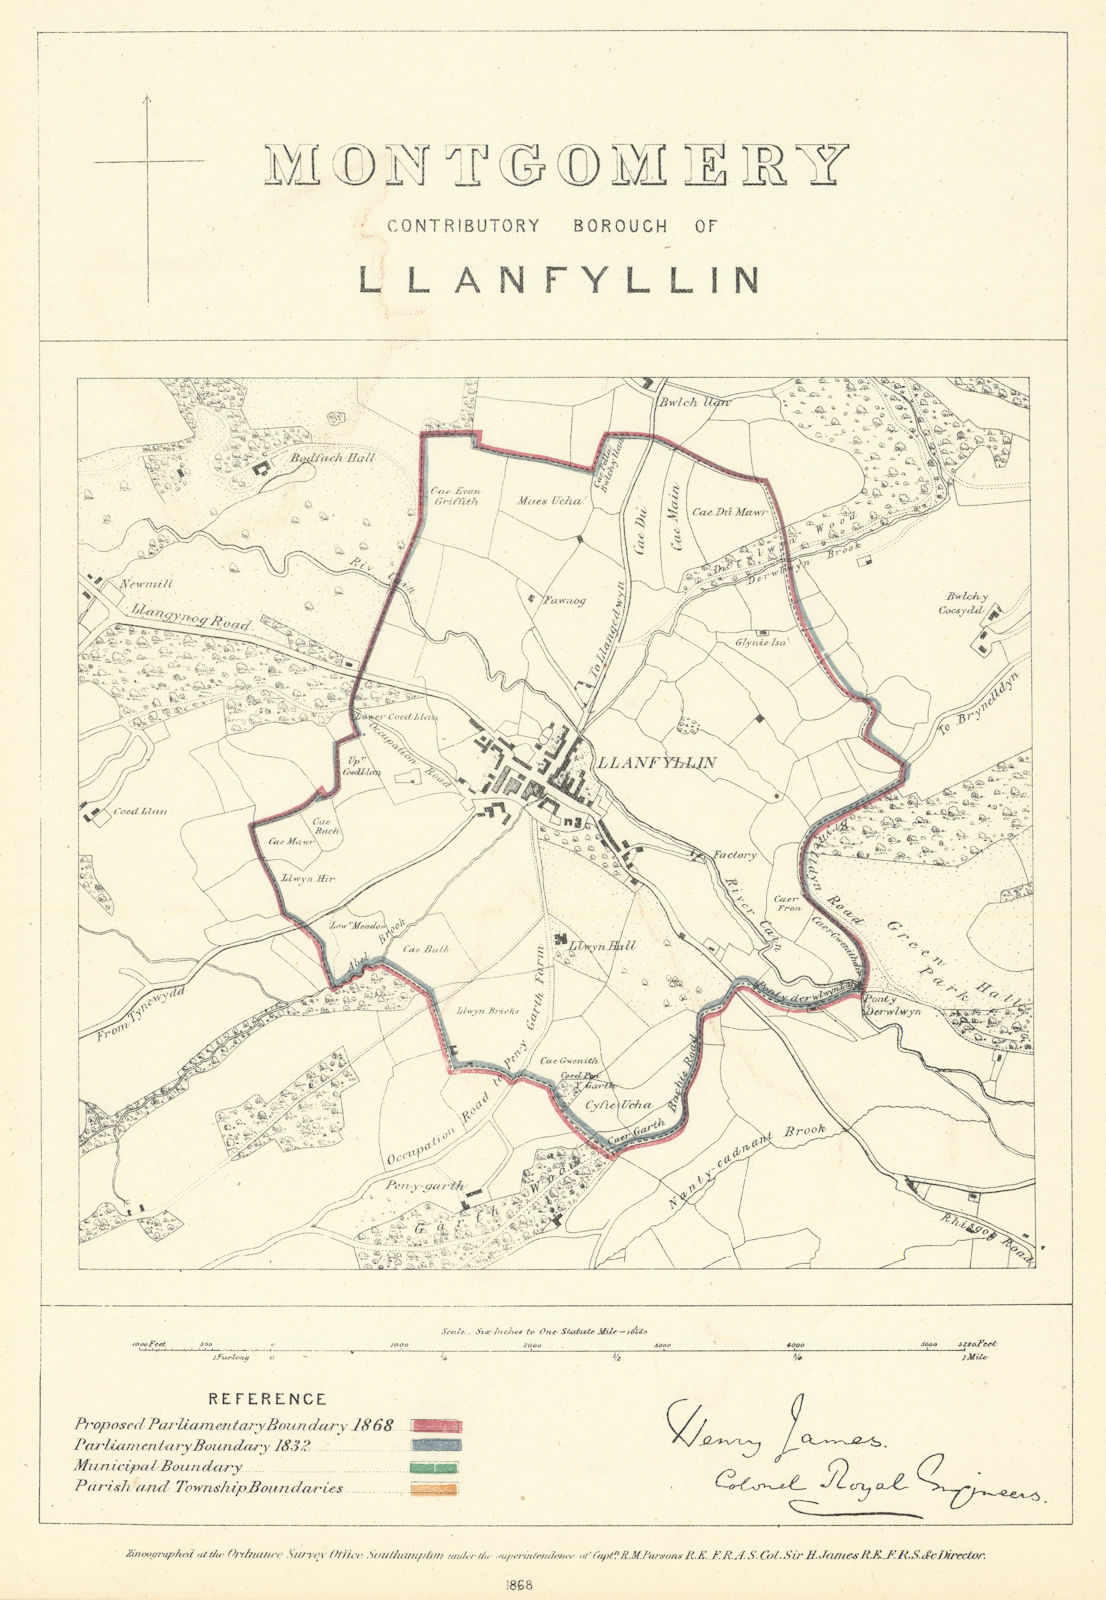 Montgomery Contrib'y Borough of Llanfyllin. JAMES. Boundary Commission 1868 map